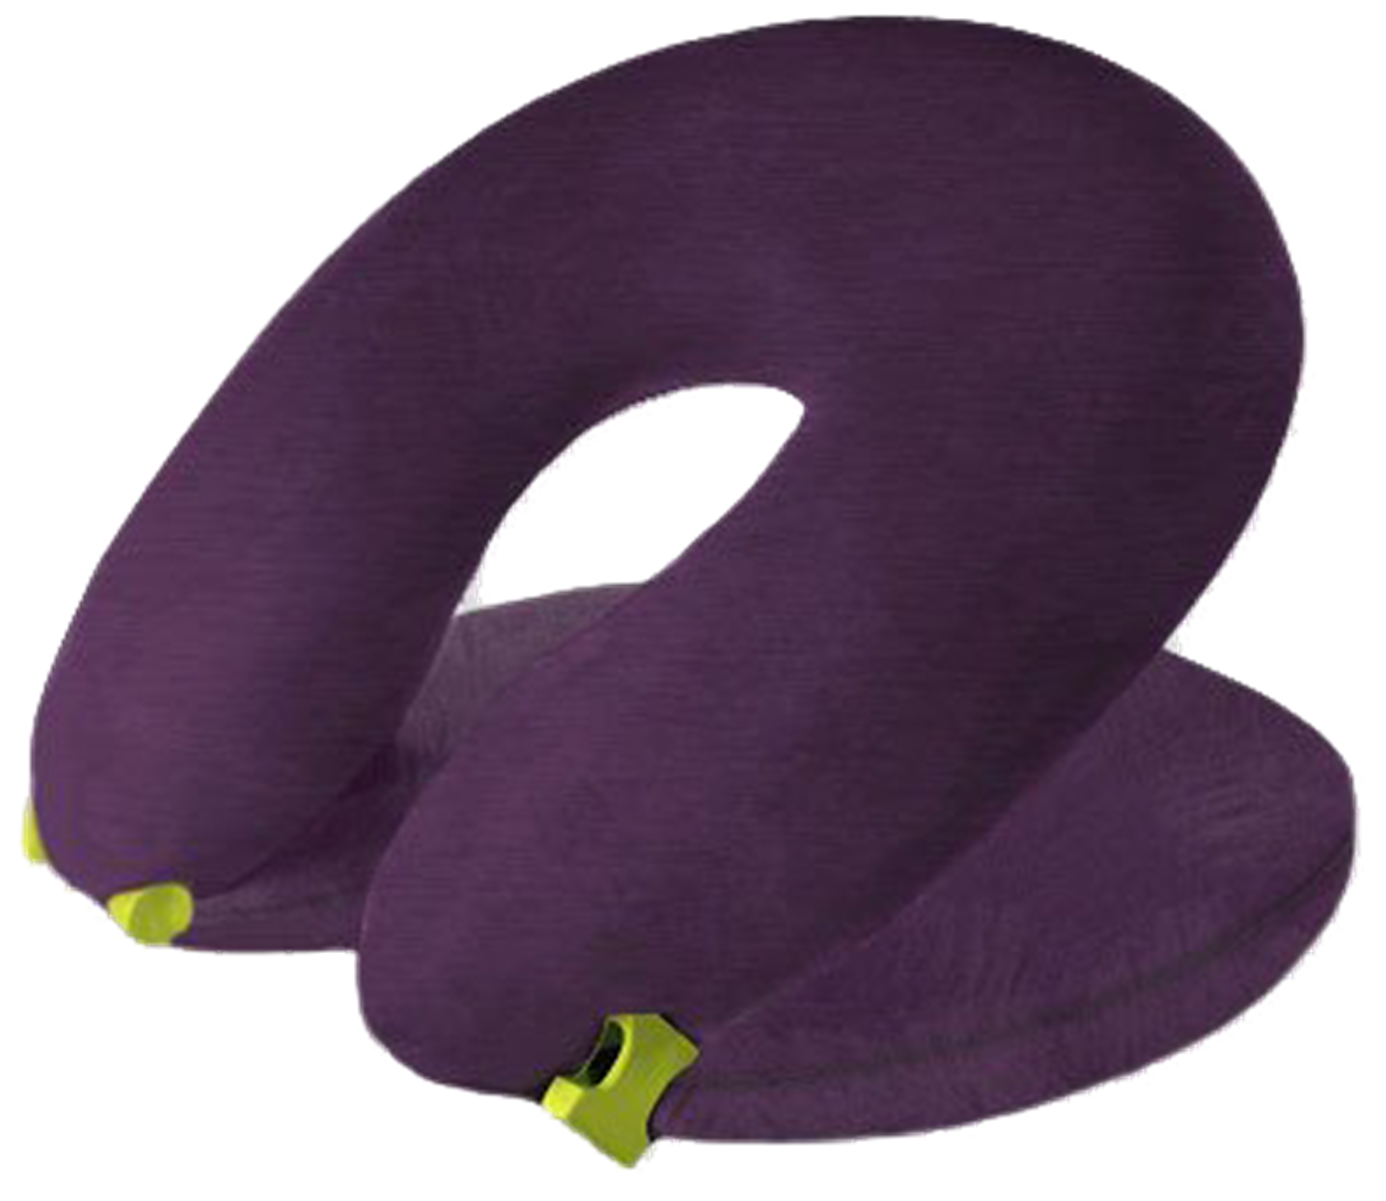 FaceCradle Travel Pillow with 5 modes